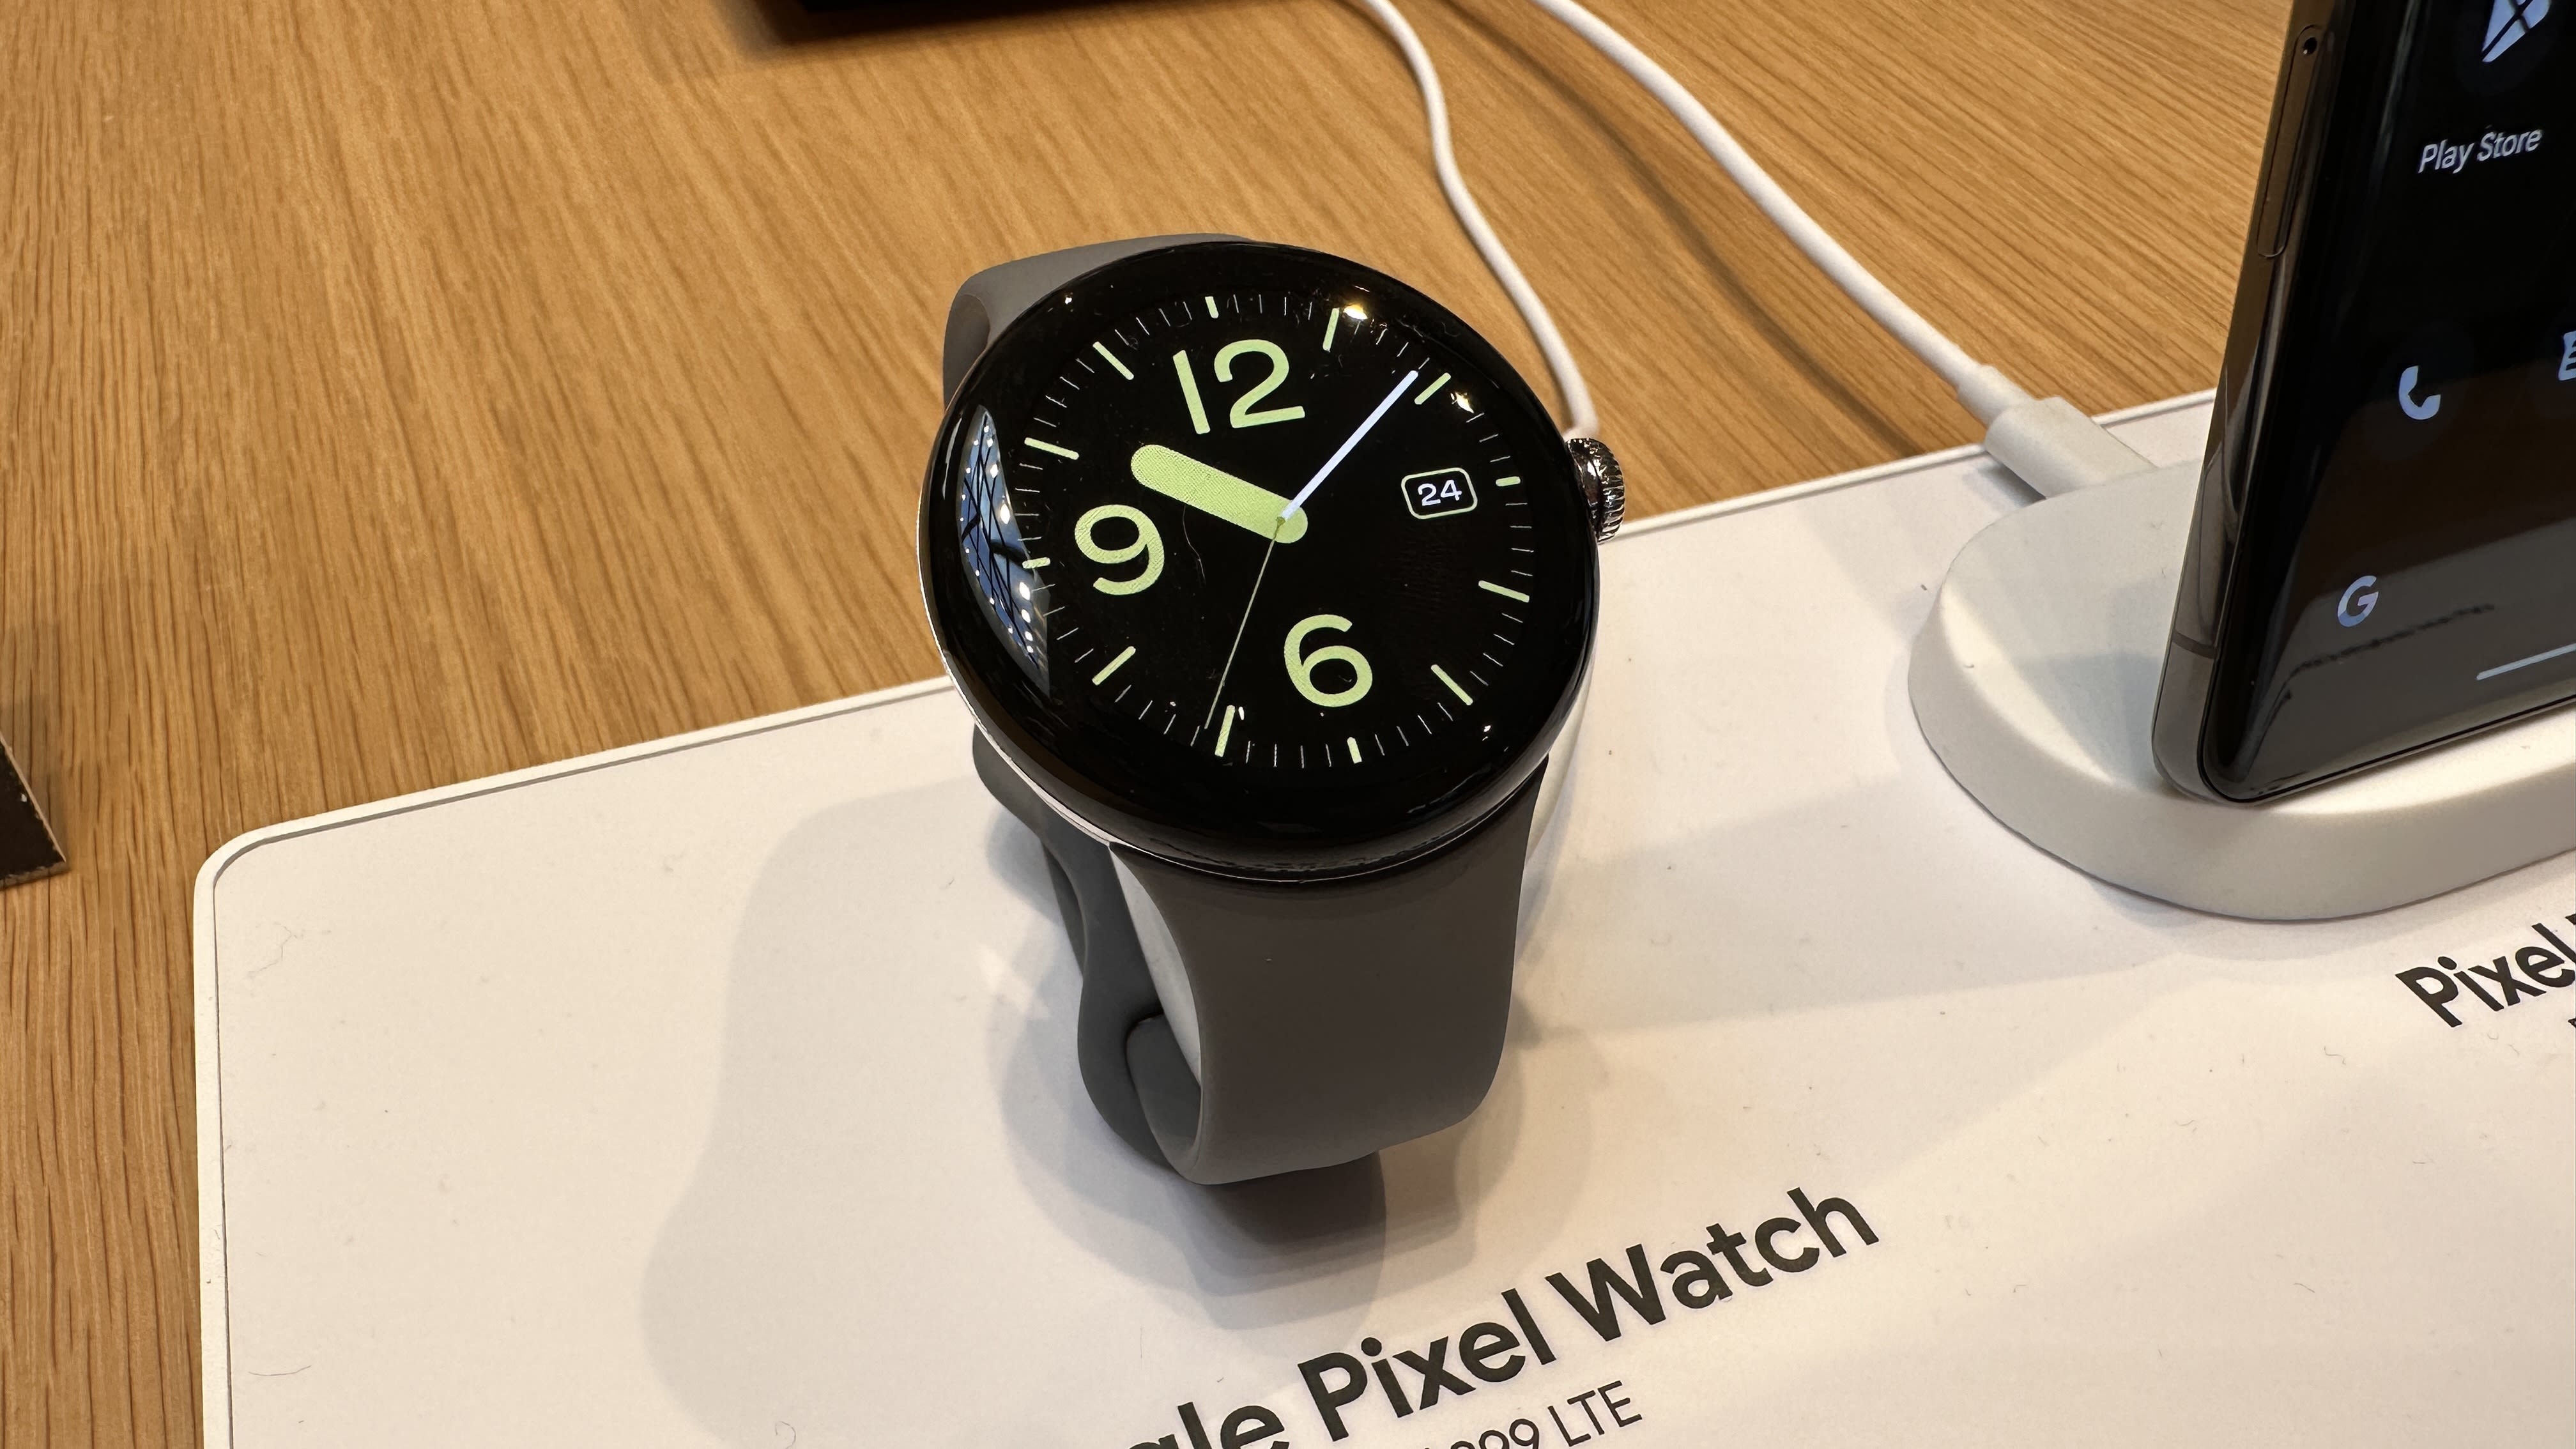 Google Pixel Watch 2 hands-on and where to preorder